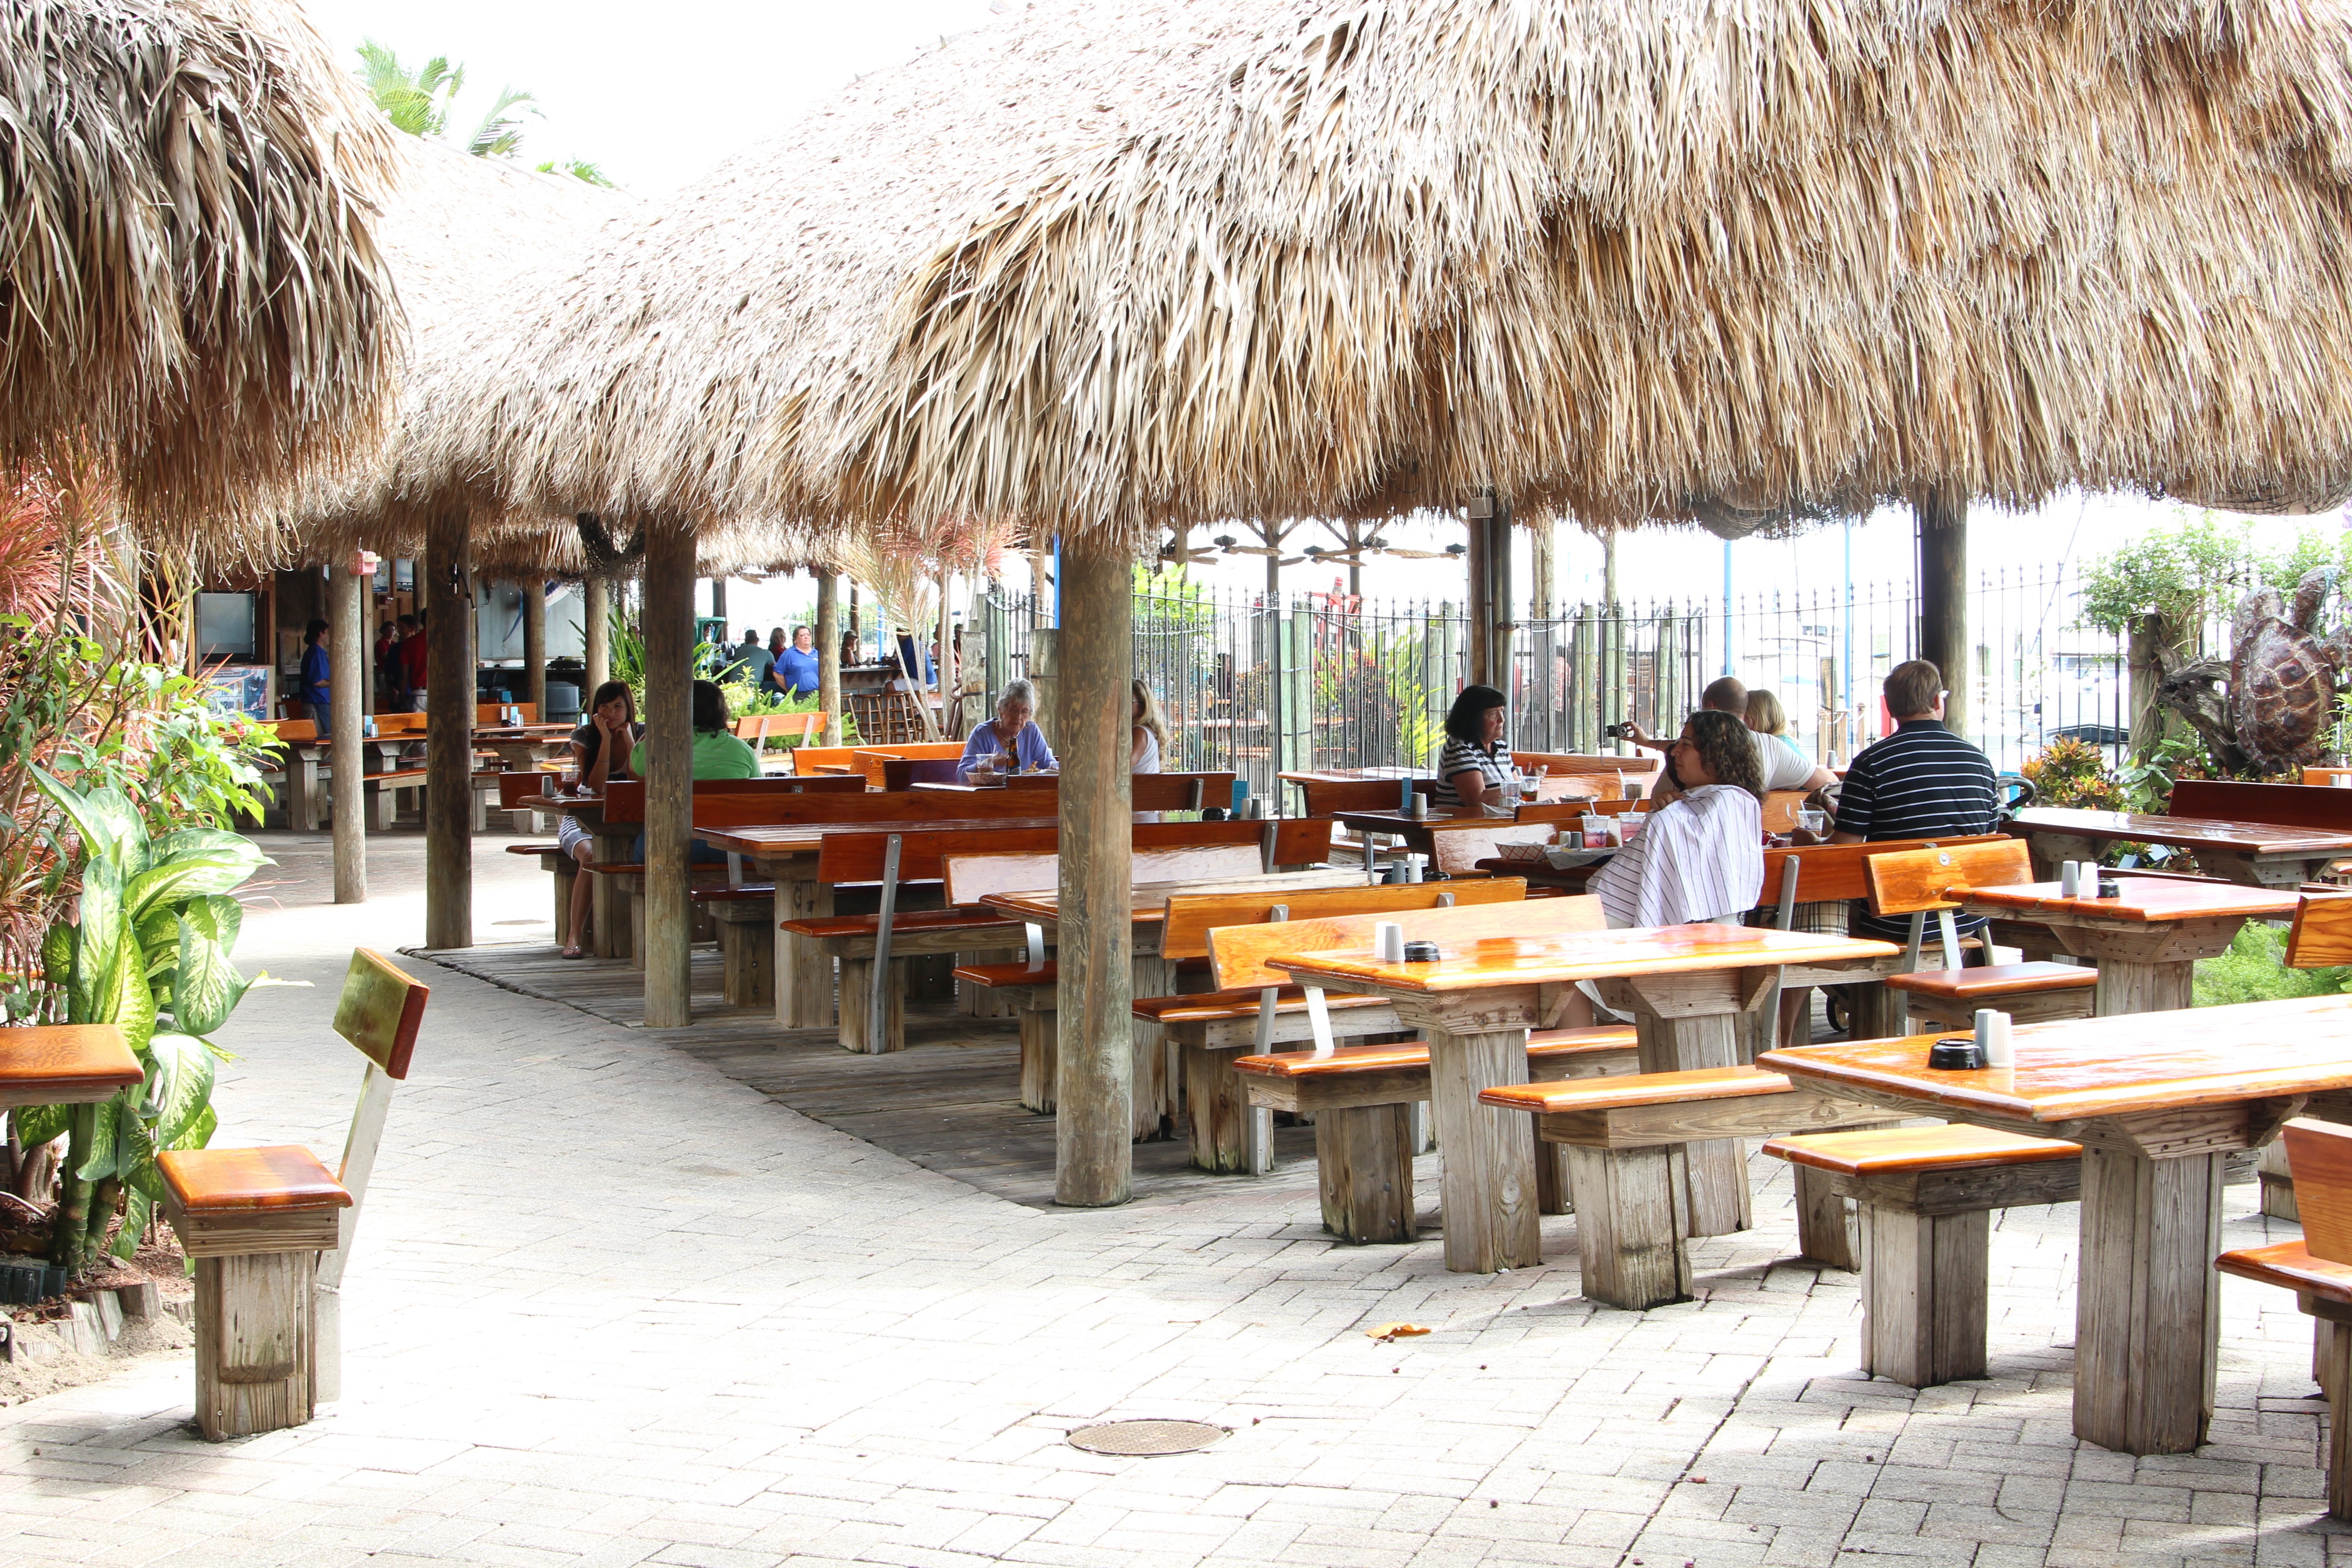 Customers relax and enjoy their seafood while sitting under the Tiki Huts that adorn the interior of Monty's (Photo by Brittany Weiner).